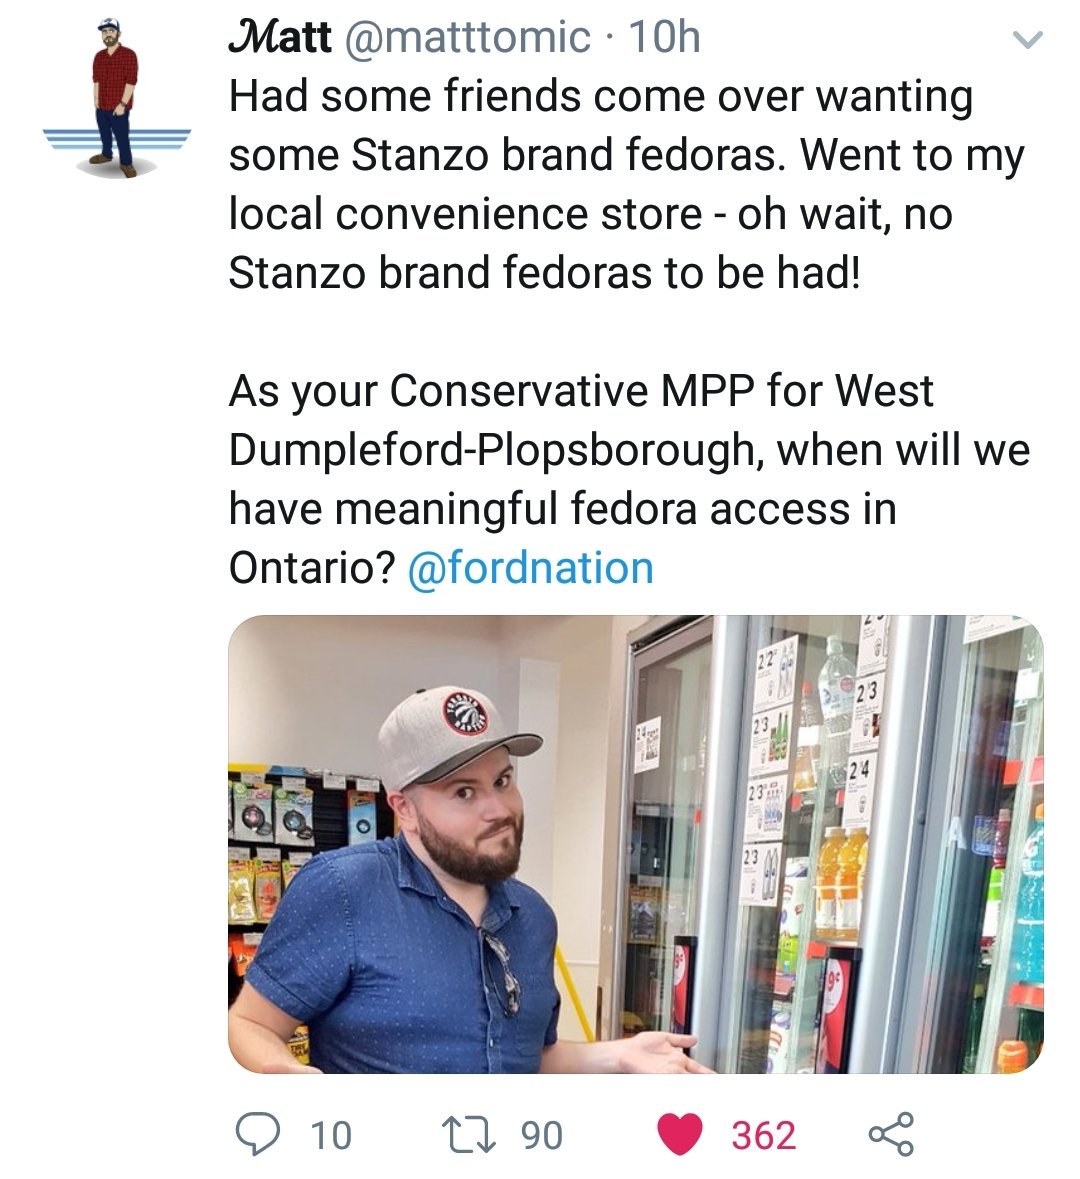 But wait. It gets worse.When you make MPPs do the same gimmick in every community with the same lines based on assumptions that don't apply well locally - you offend their constituents. And the MPP wears it.Mocking your local PC MPP became a provincial sport for one and all.